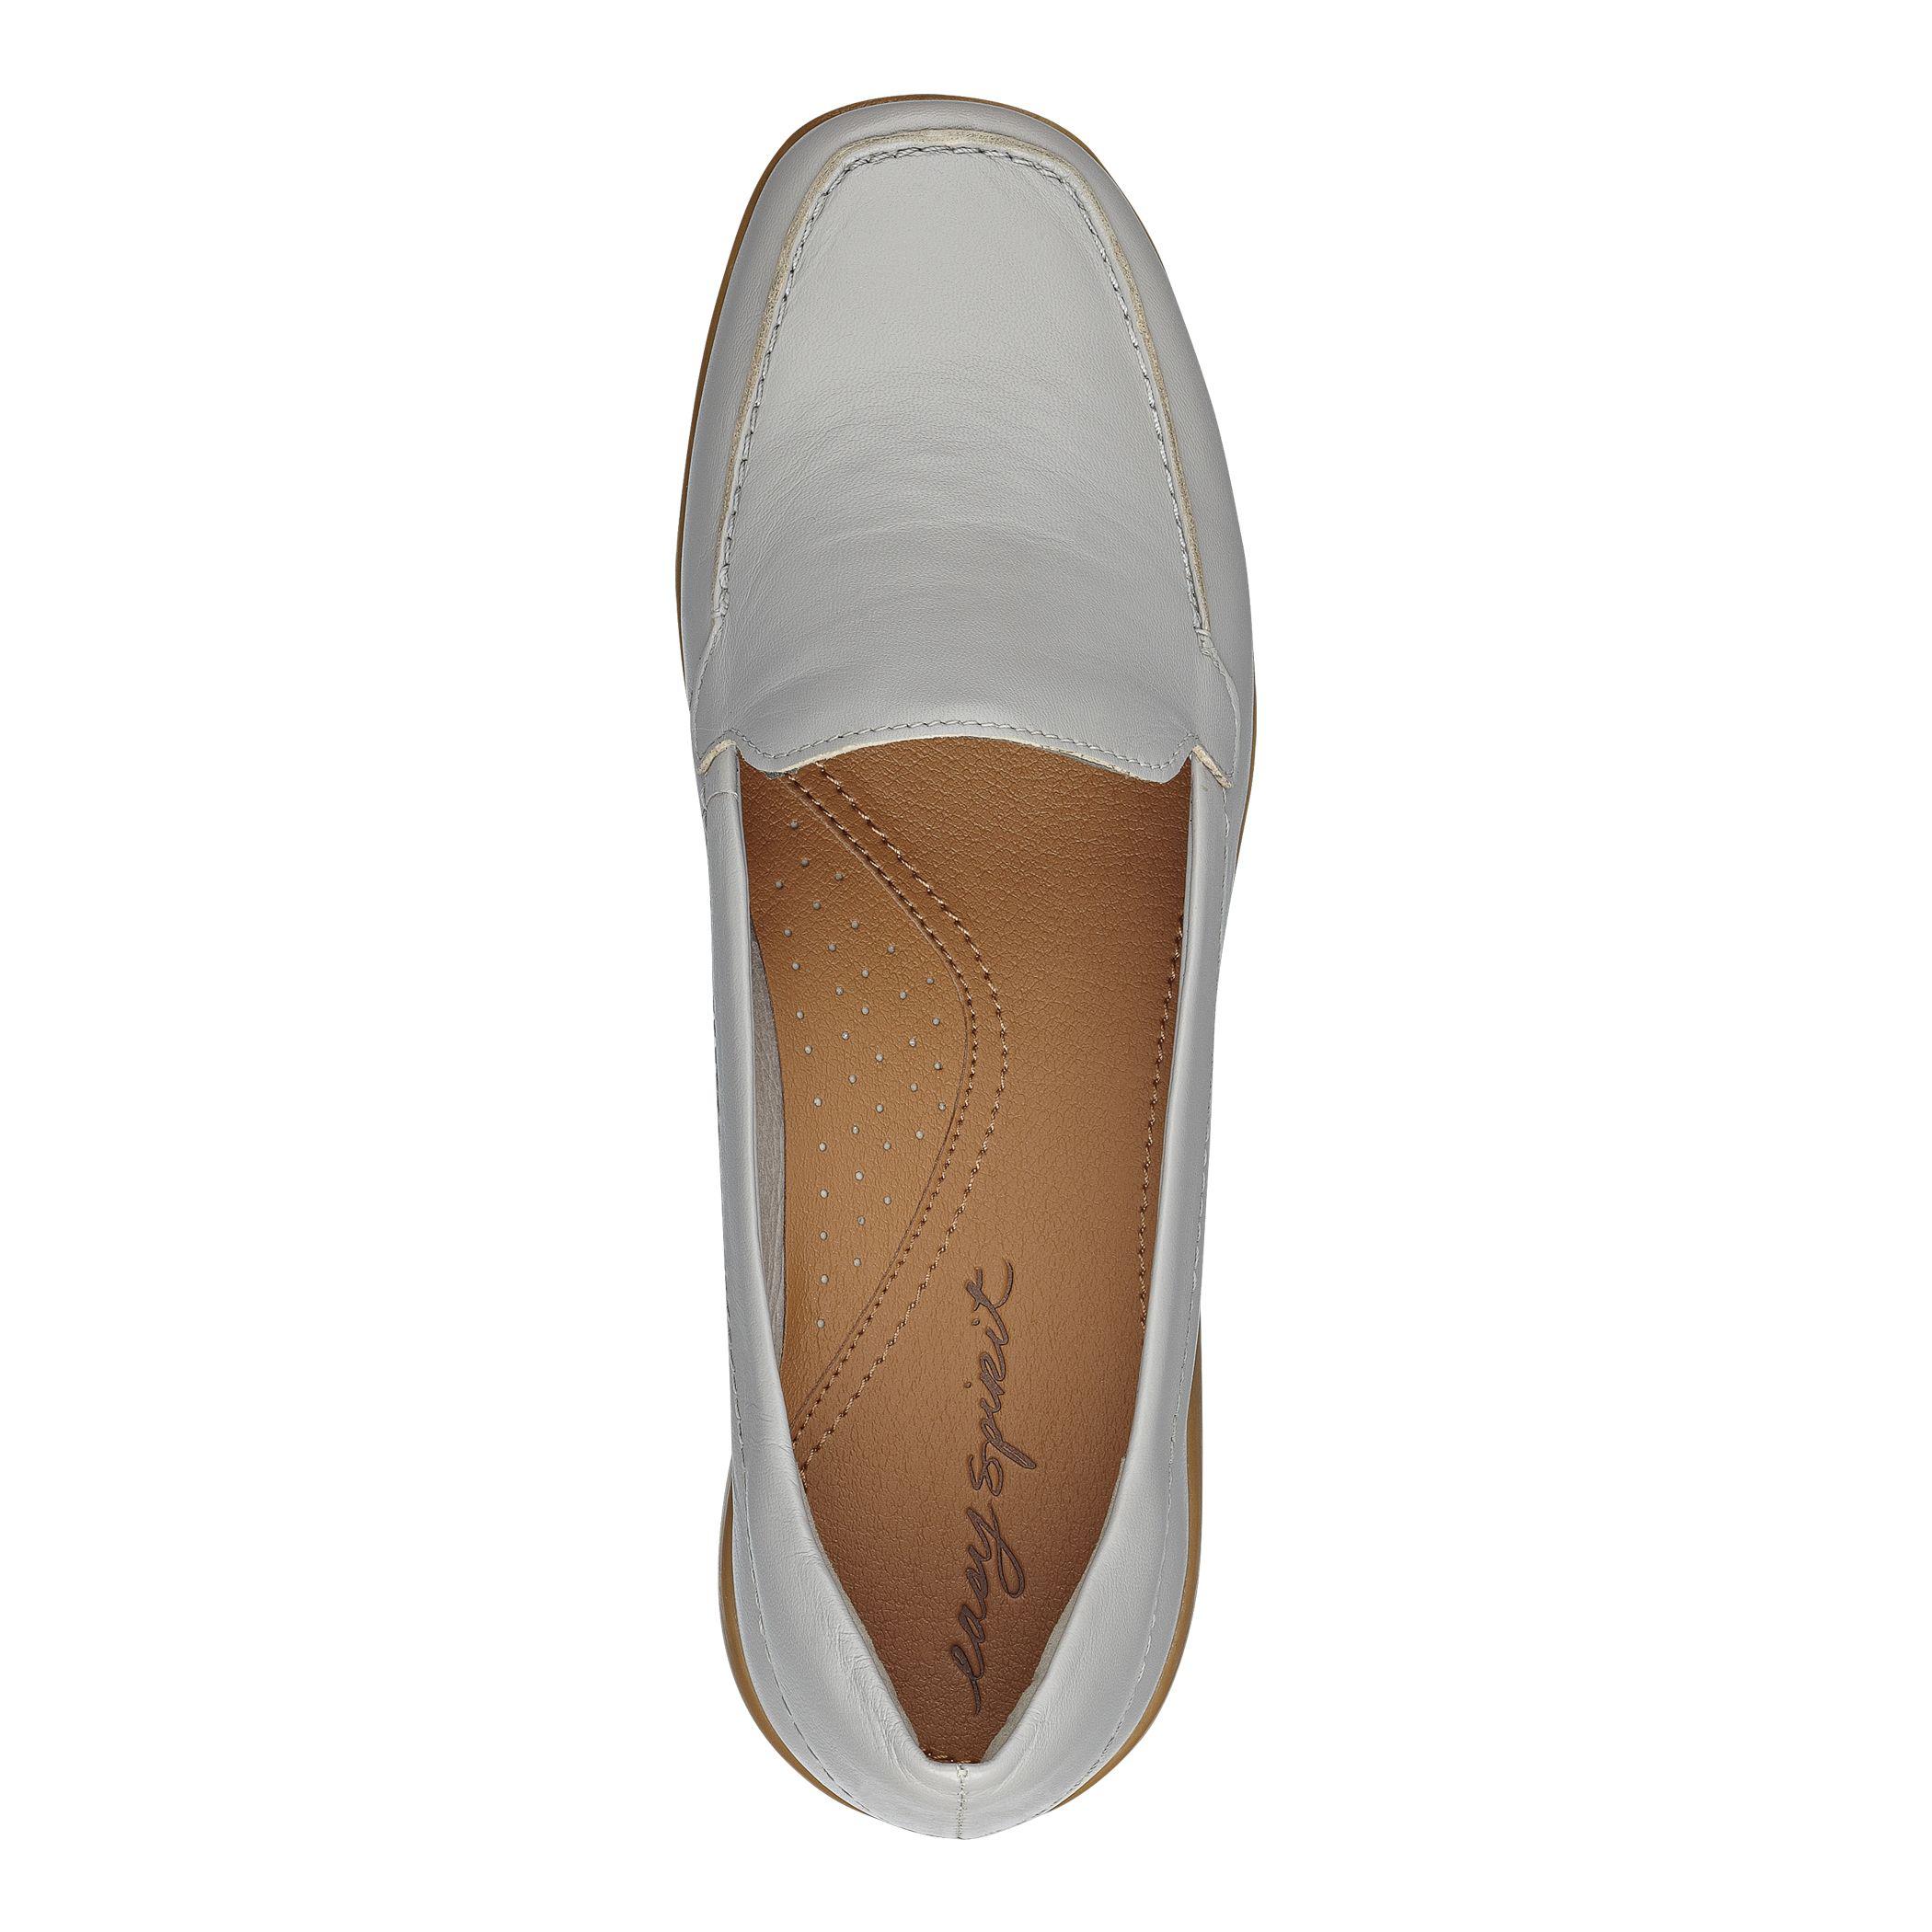 easy spirit abide leather casual flats